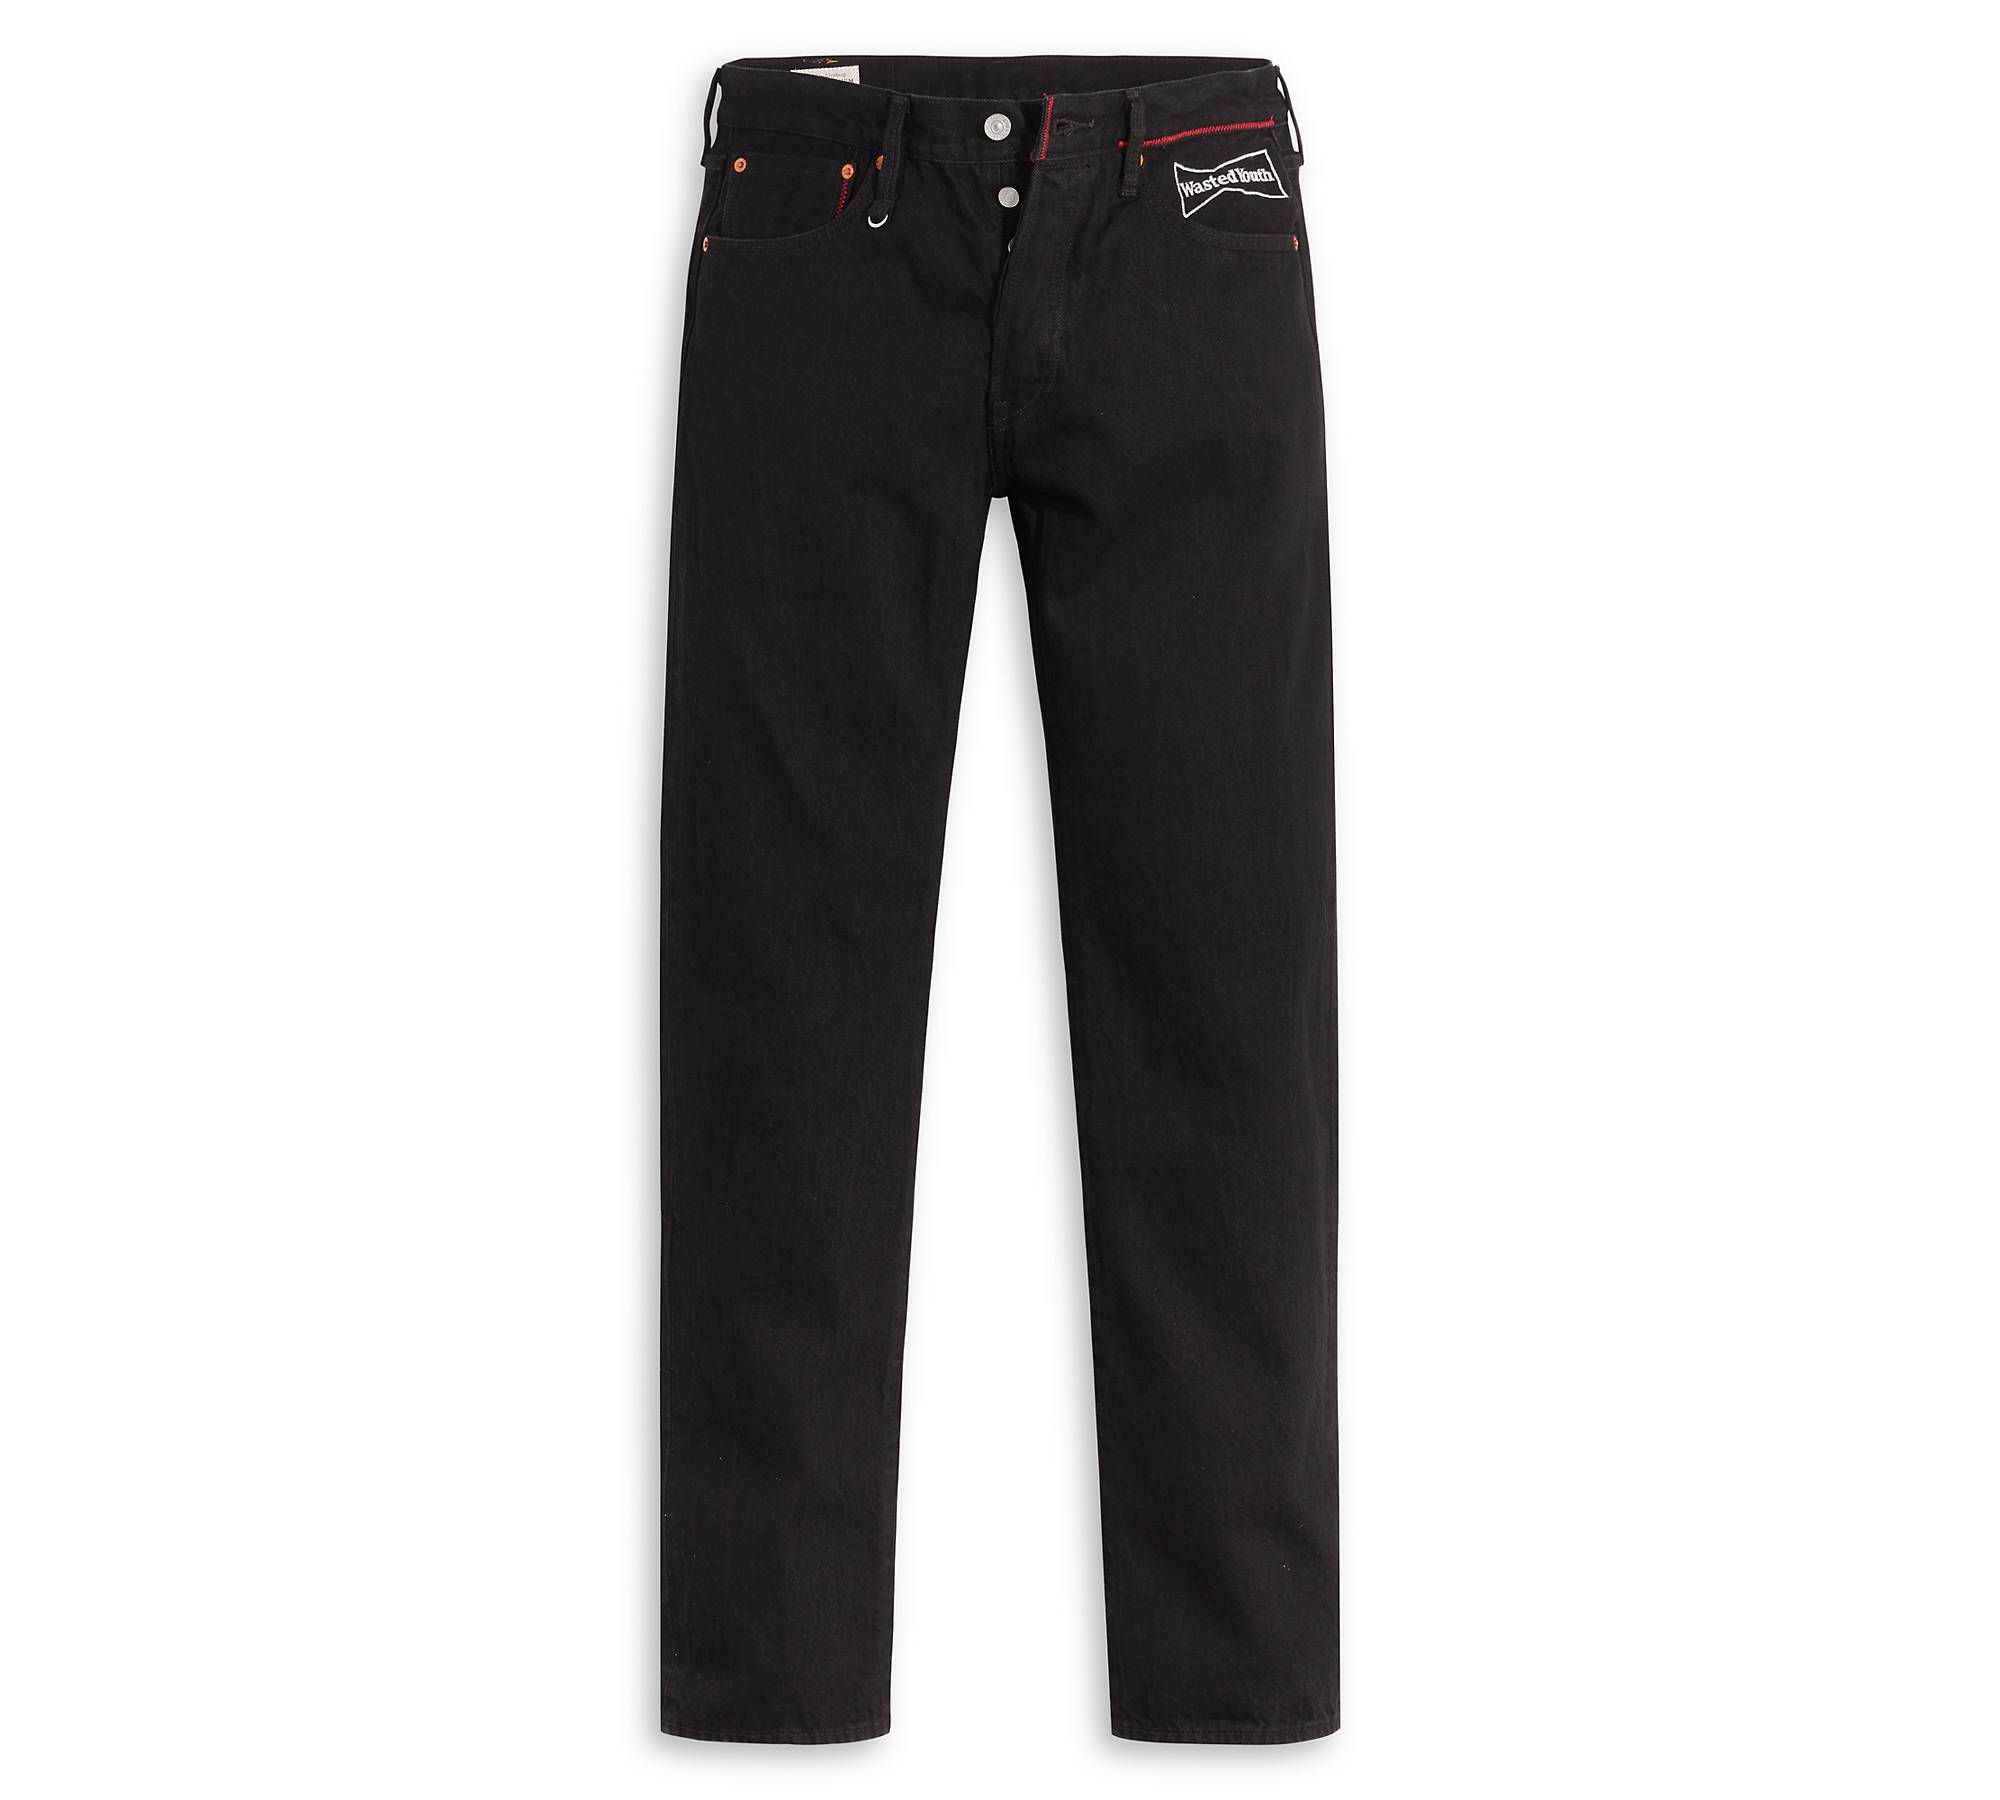 Levi's® X Verdy Wasted Youth 501® '93 Original Jeans - Black